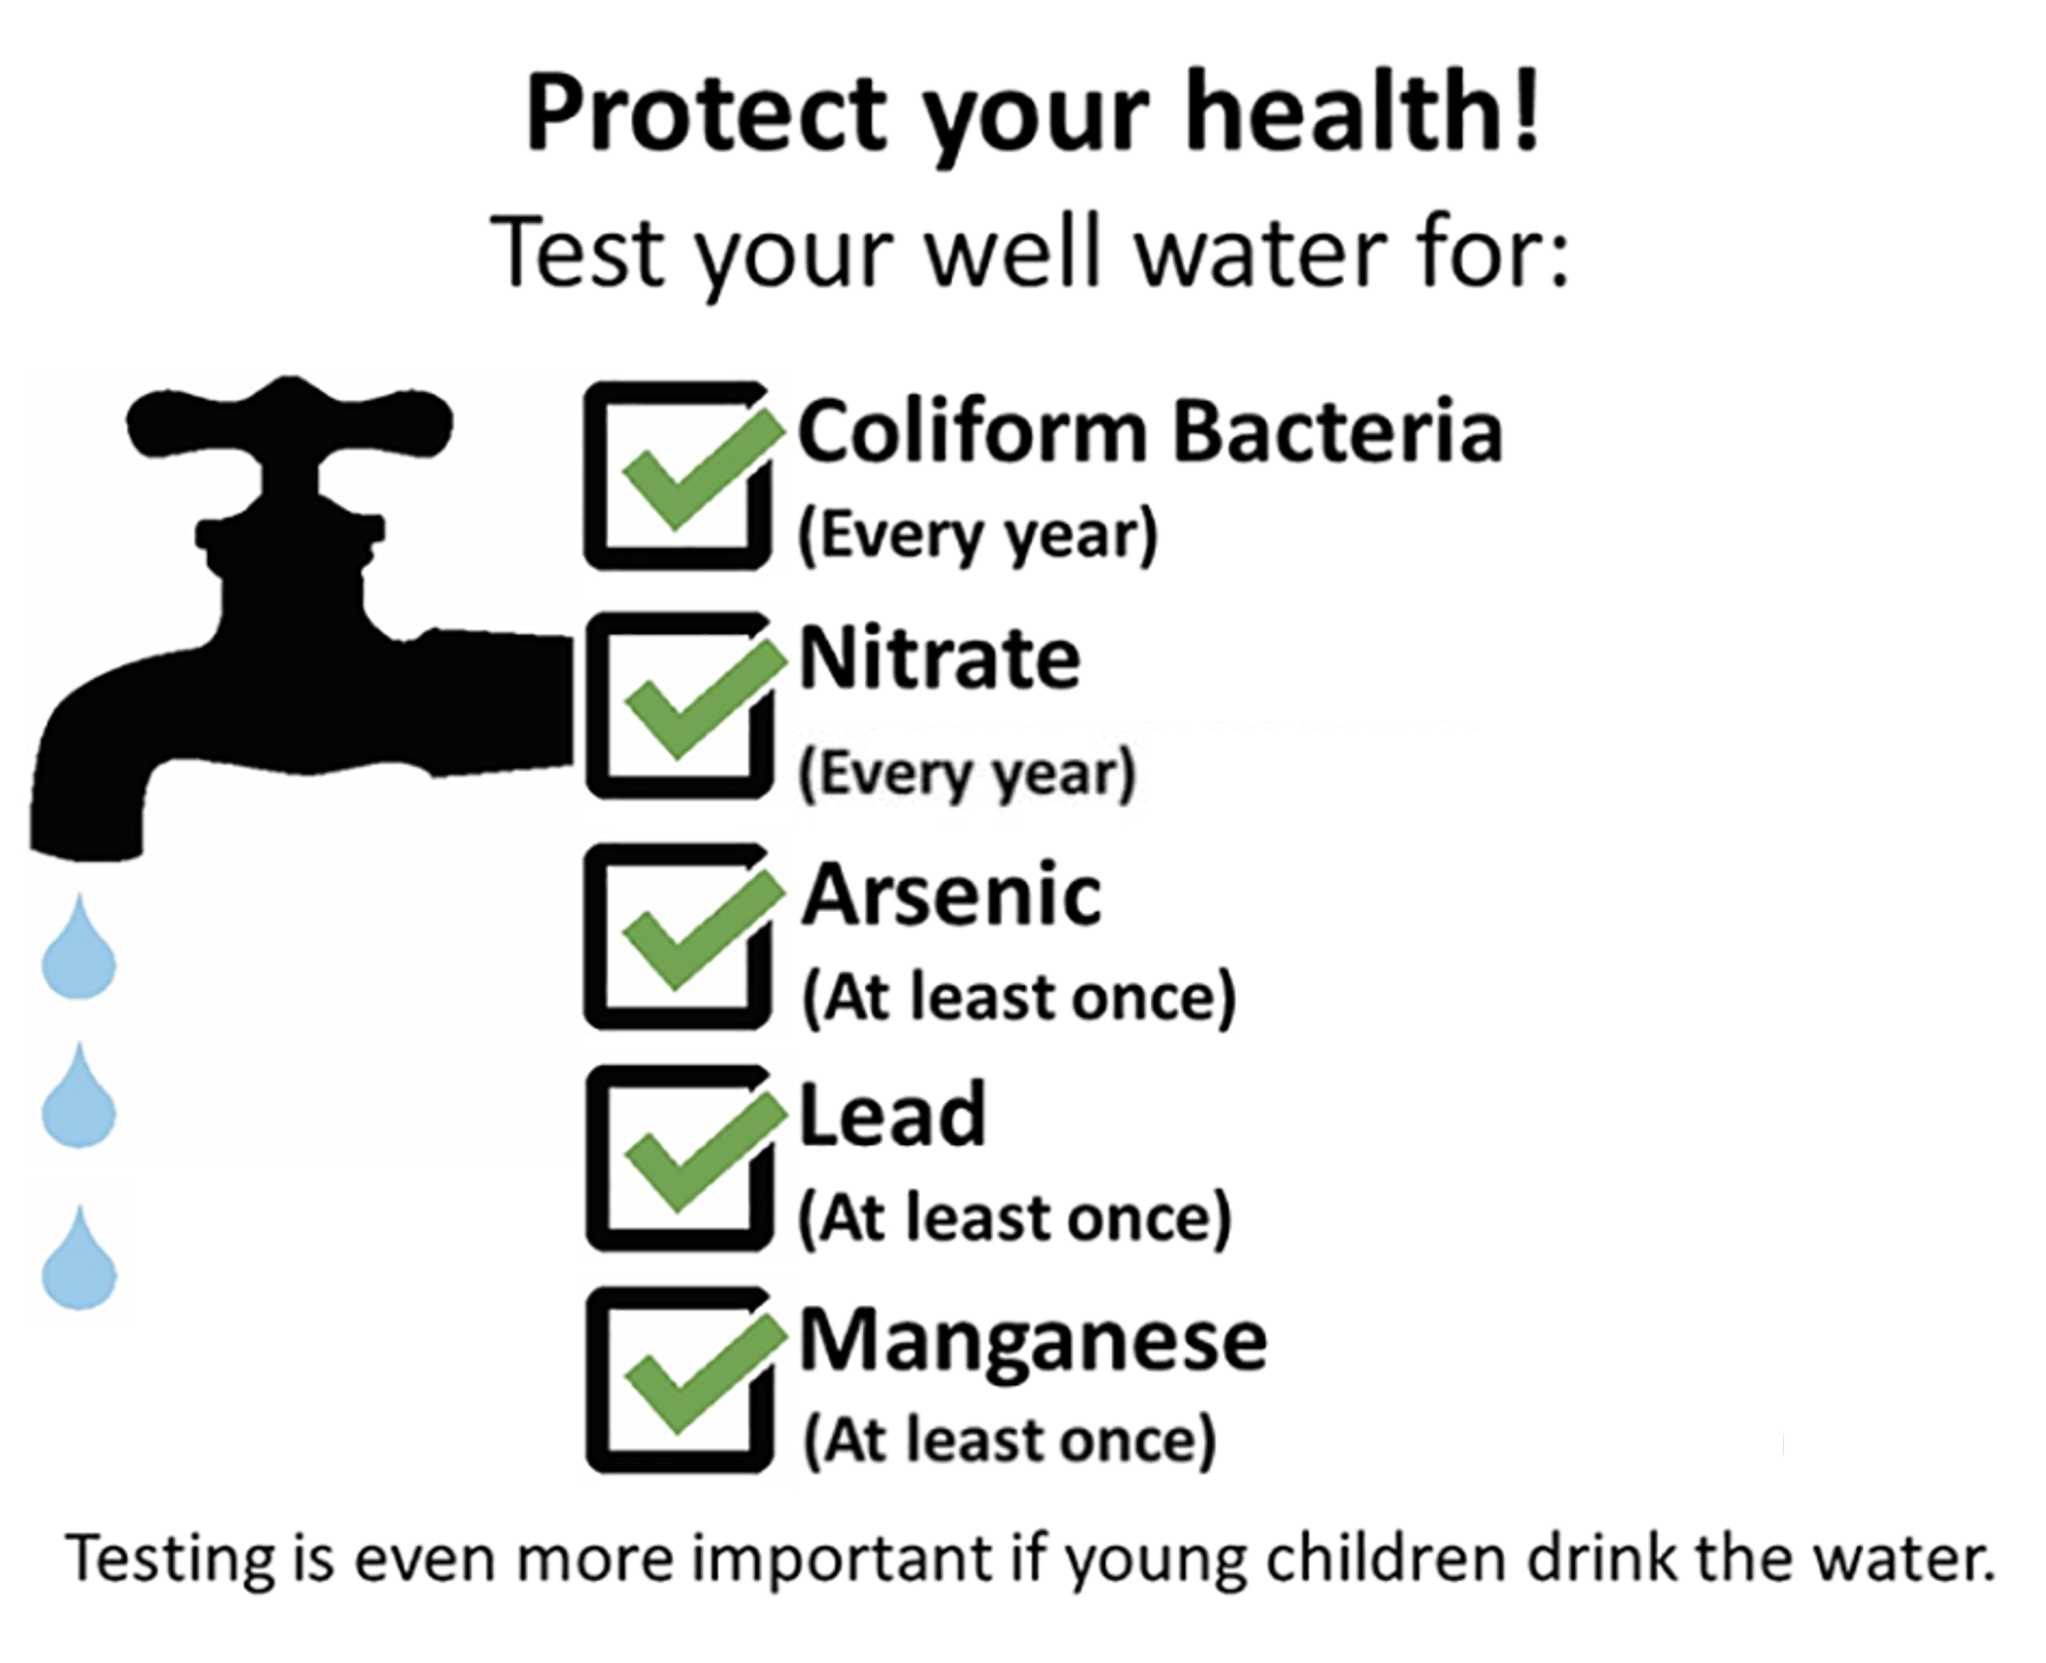 Protect your health! Test your well water for: Coliform Bacteria every year, Nitrate every other year, Arsenic at least once, Lead at least once, and Manganese before a baby drinks the water. Testing is even more important if young children drink the water.